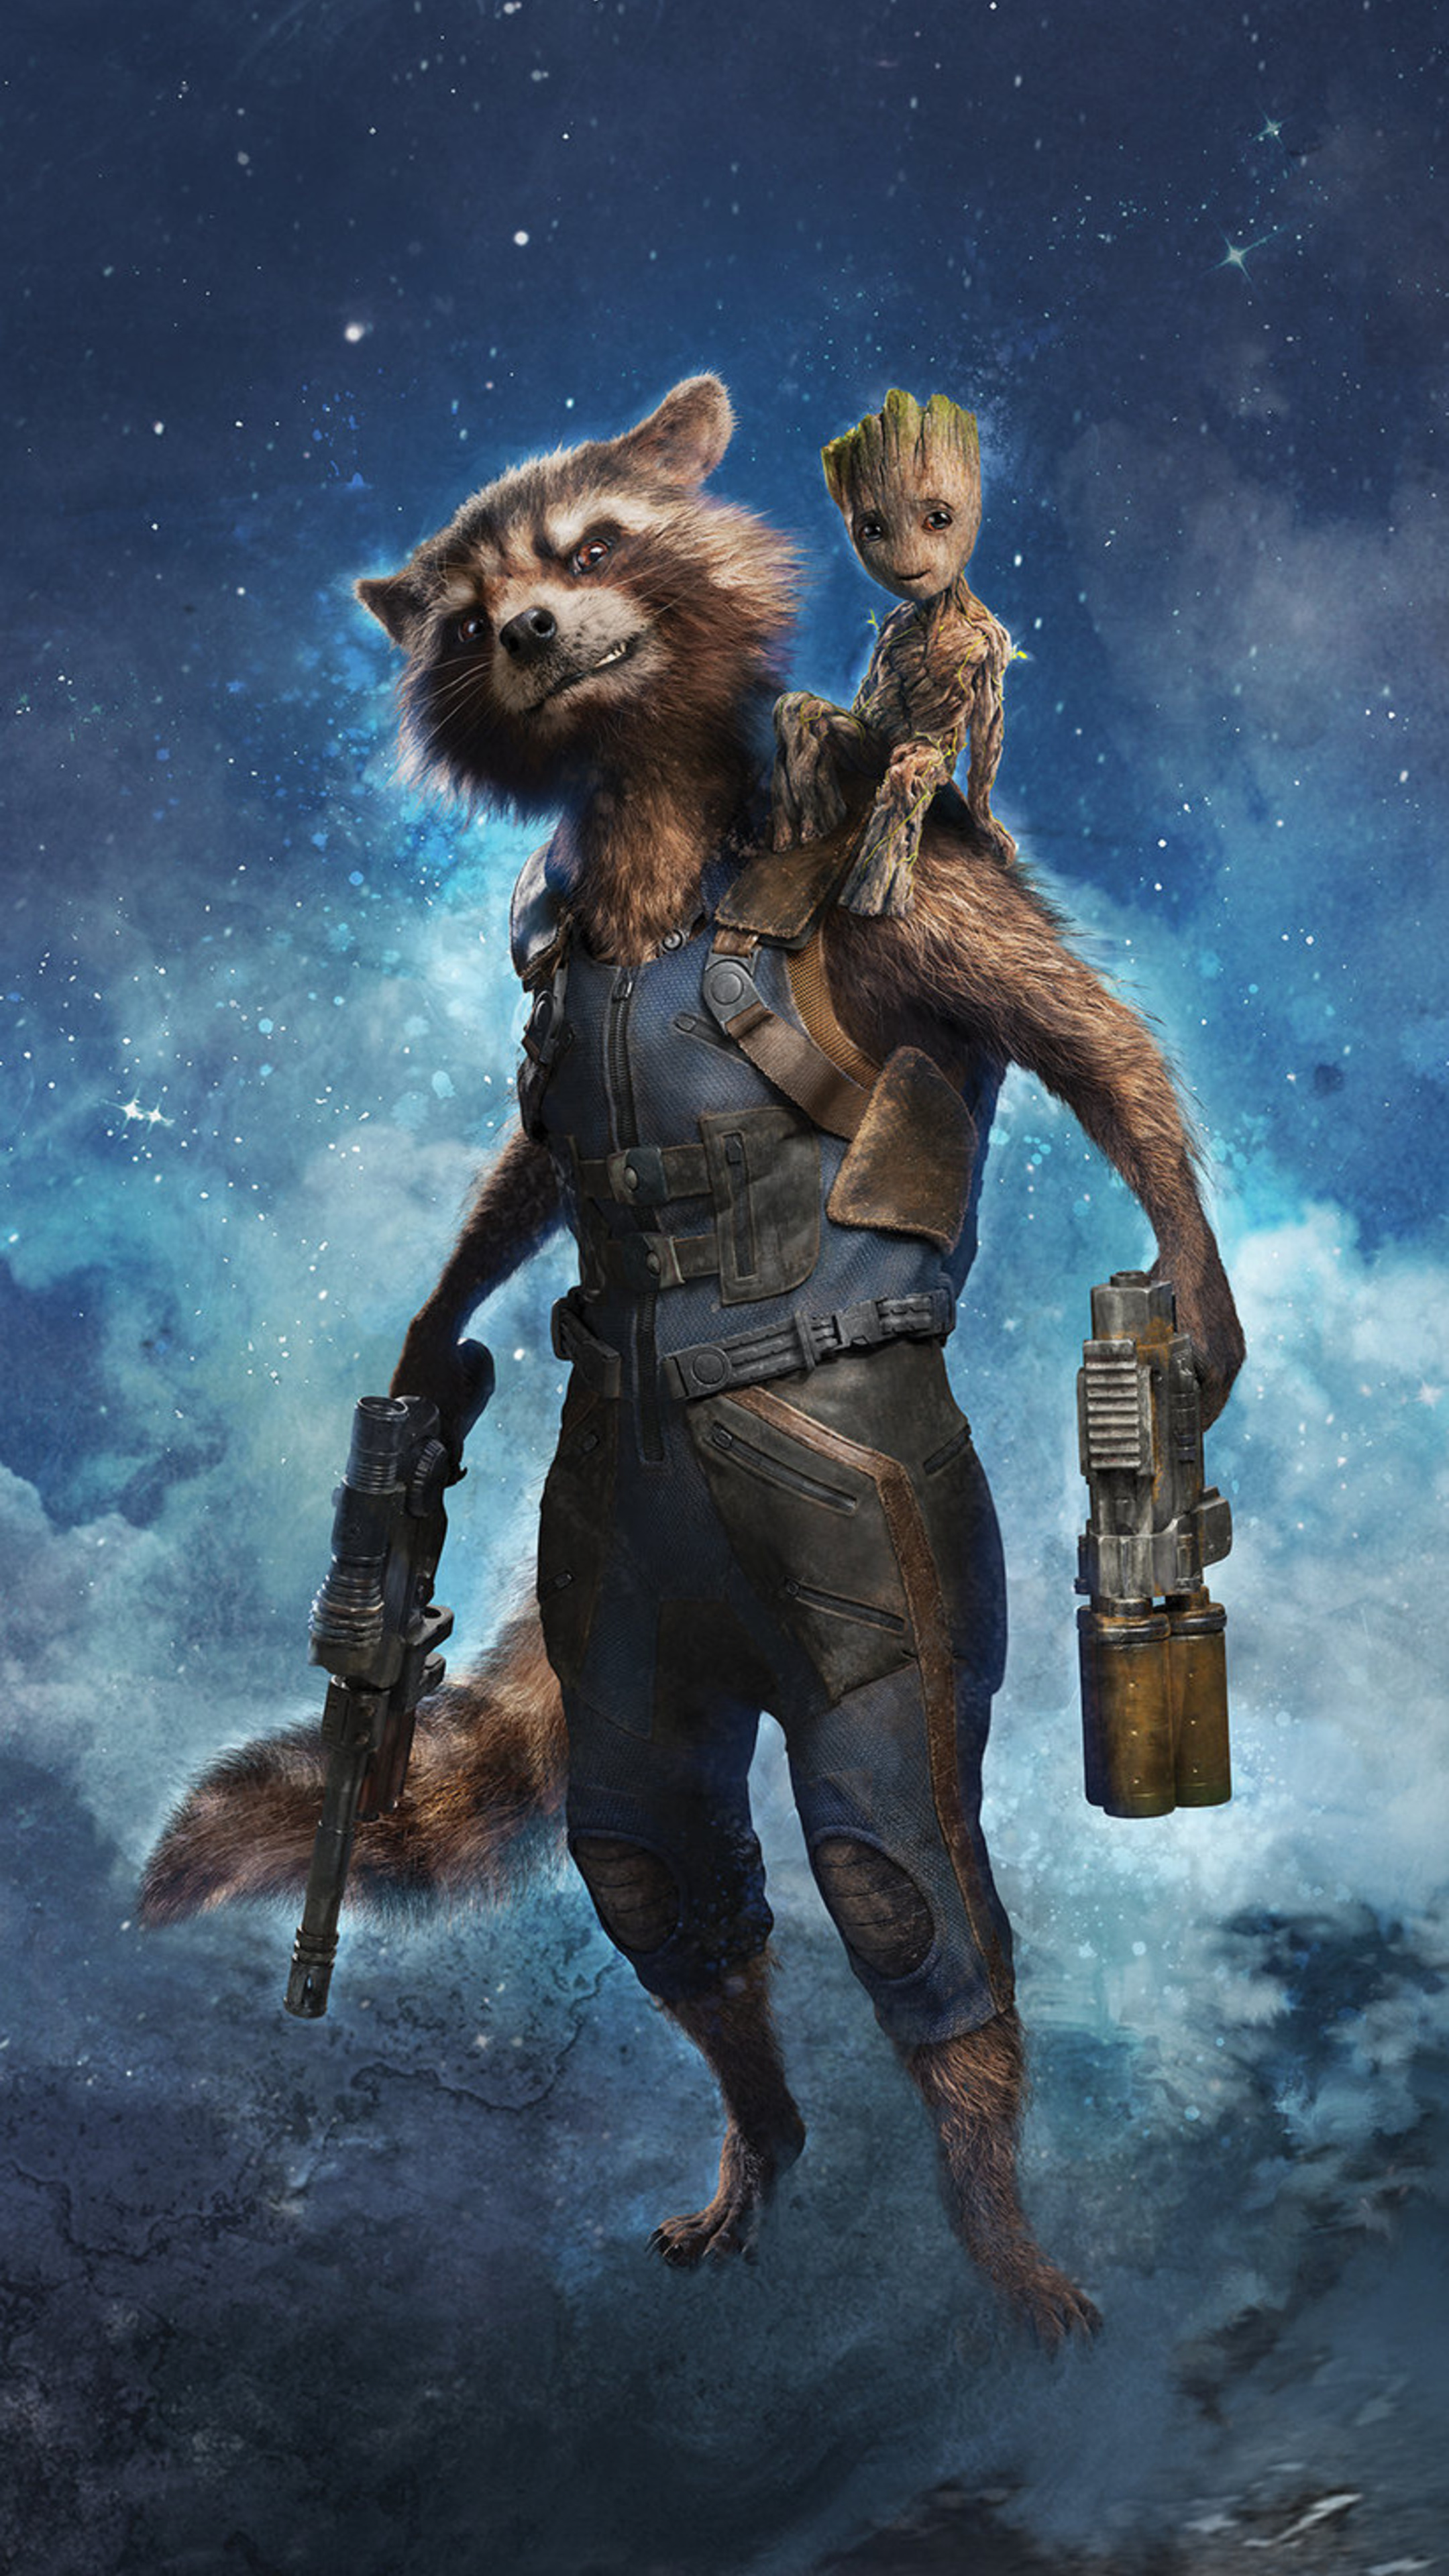 Rocket raccoon and Baby Groot, Summer of Heroes, Sony Xperia wallpapers, 2160x3840 4K Phone